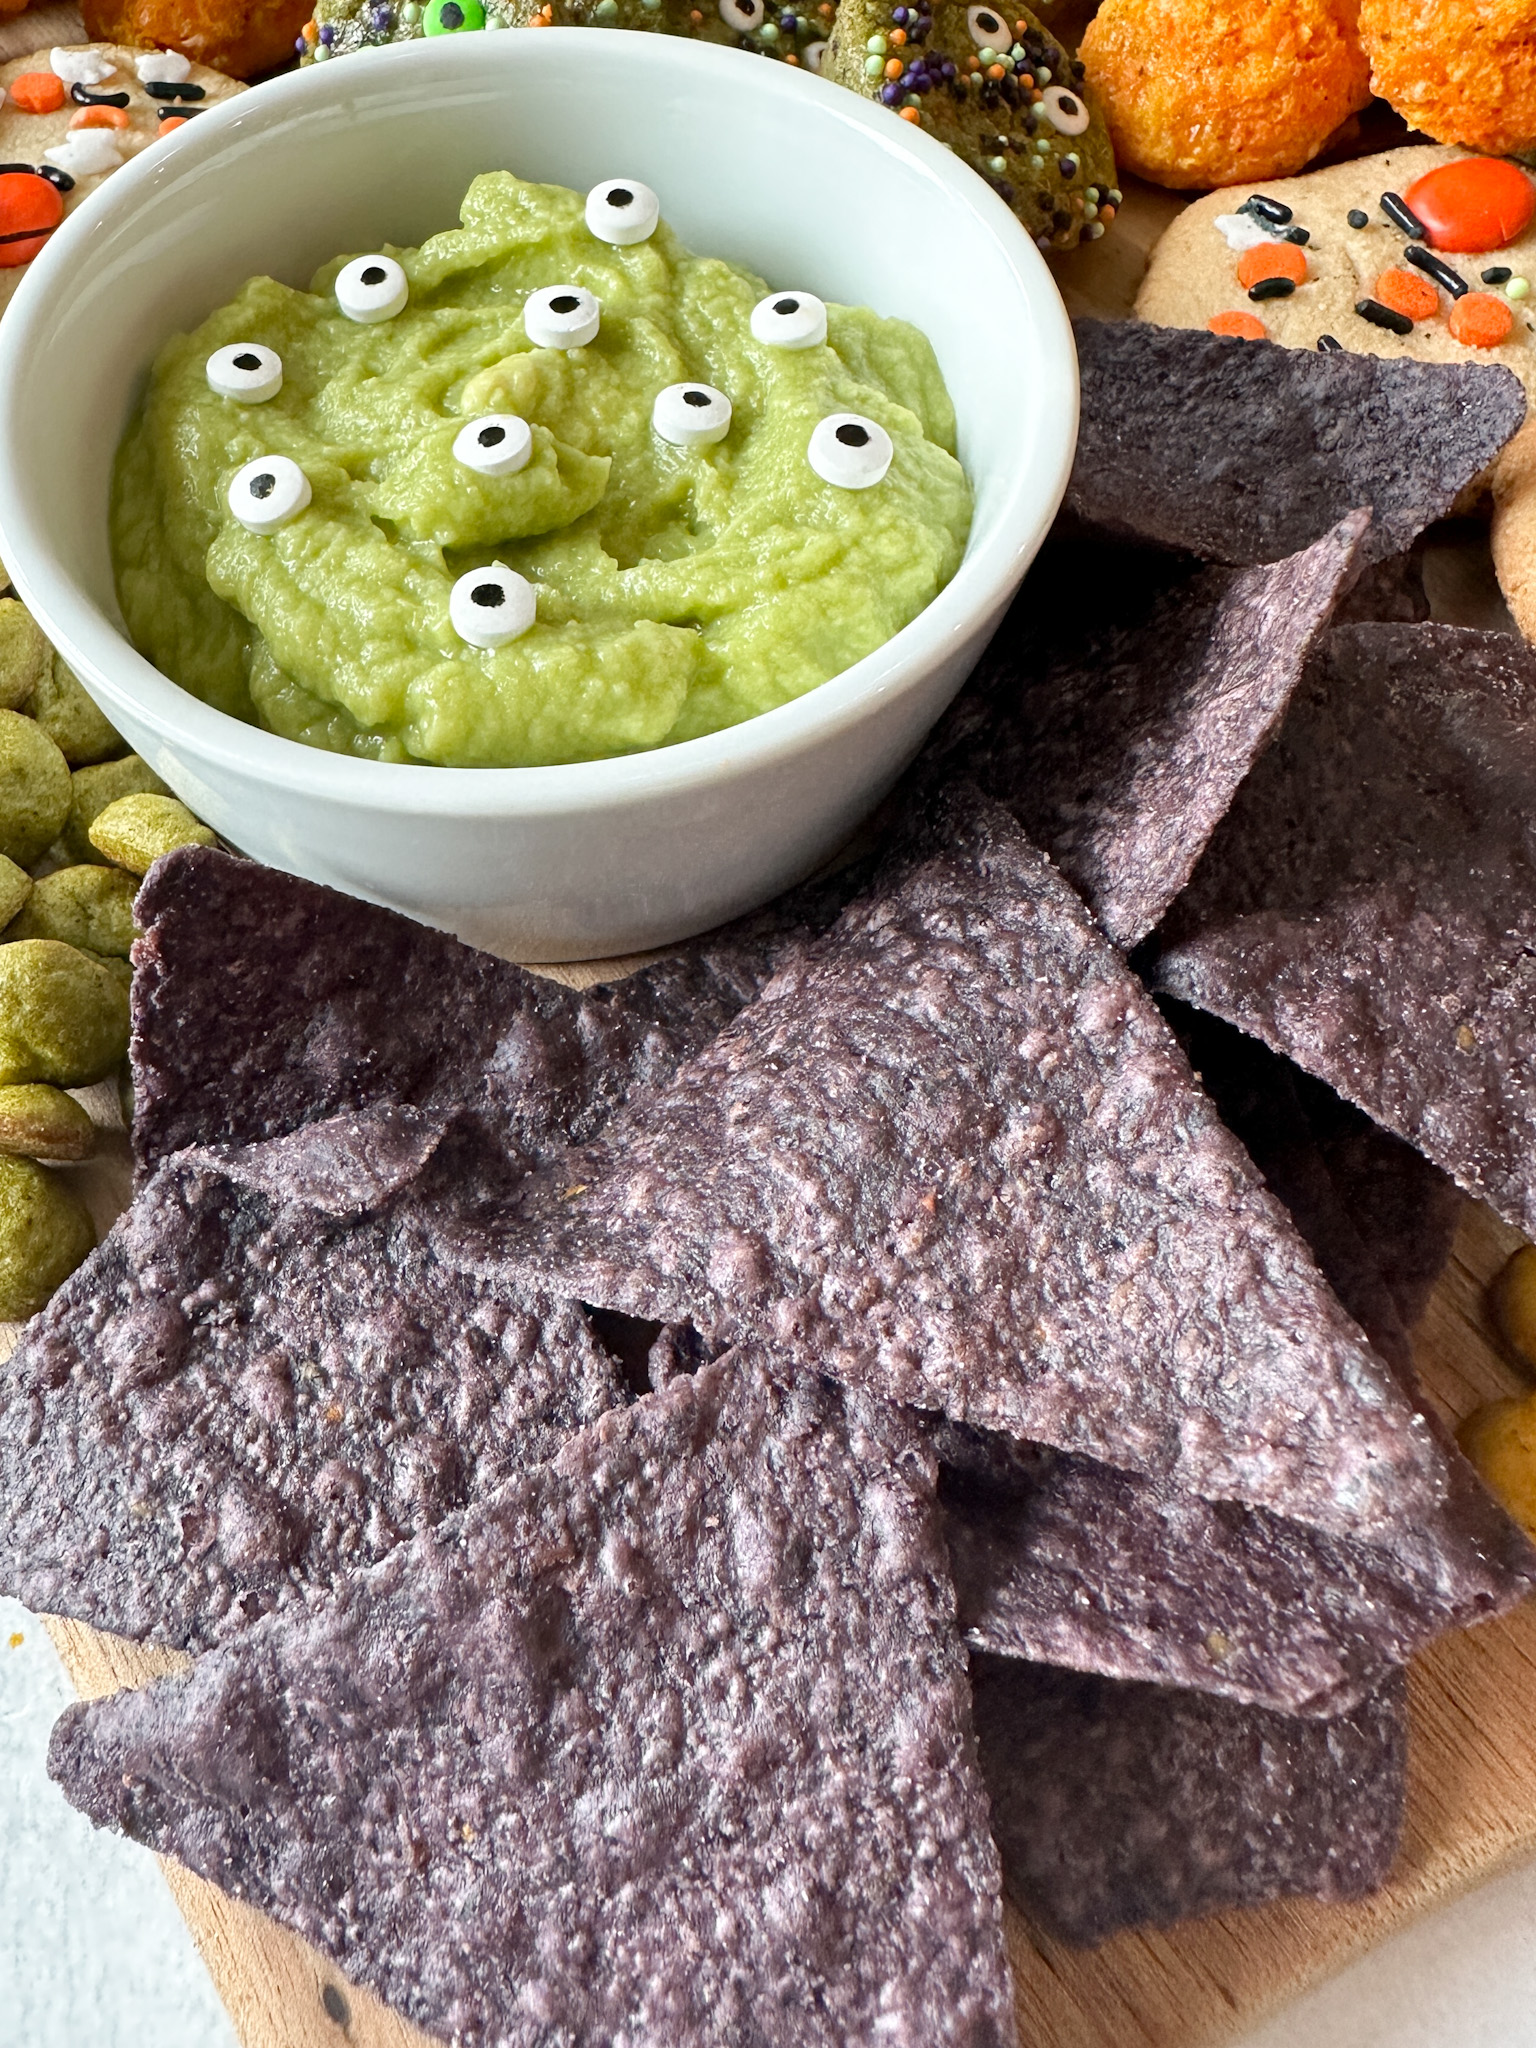 Guacamole and blue corn chips.